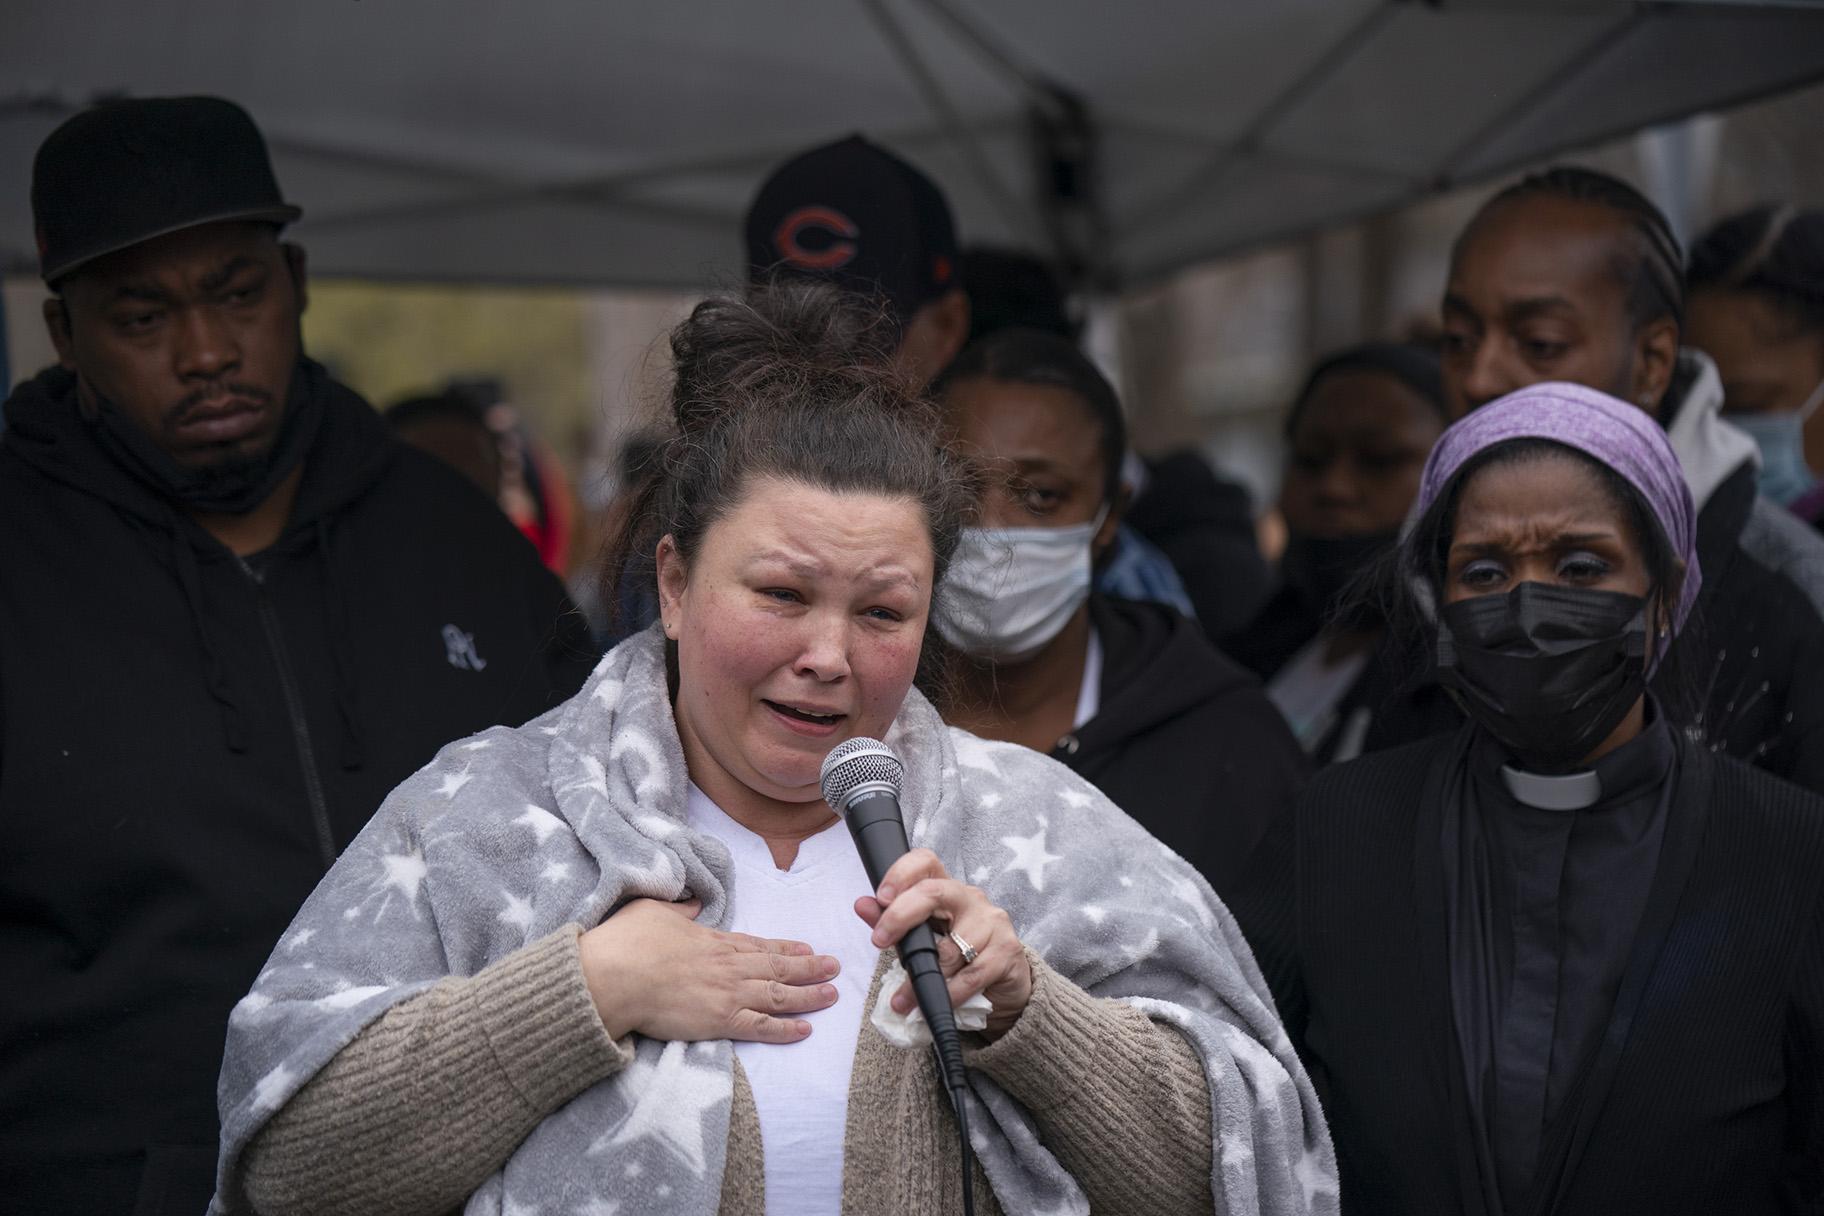 Daunte Wright’s mother, Katie, eulogizes her son at his vigil, Monday, April 12, 2021, as the community responded to the police killing of 20-year-old Wright, with hundreds joining his family at the location on 63 Ave. N. in Brooklyn Center, Minn., where he was killed. (Jeff Wheeler / Star Tribune via AP)